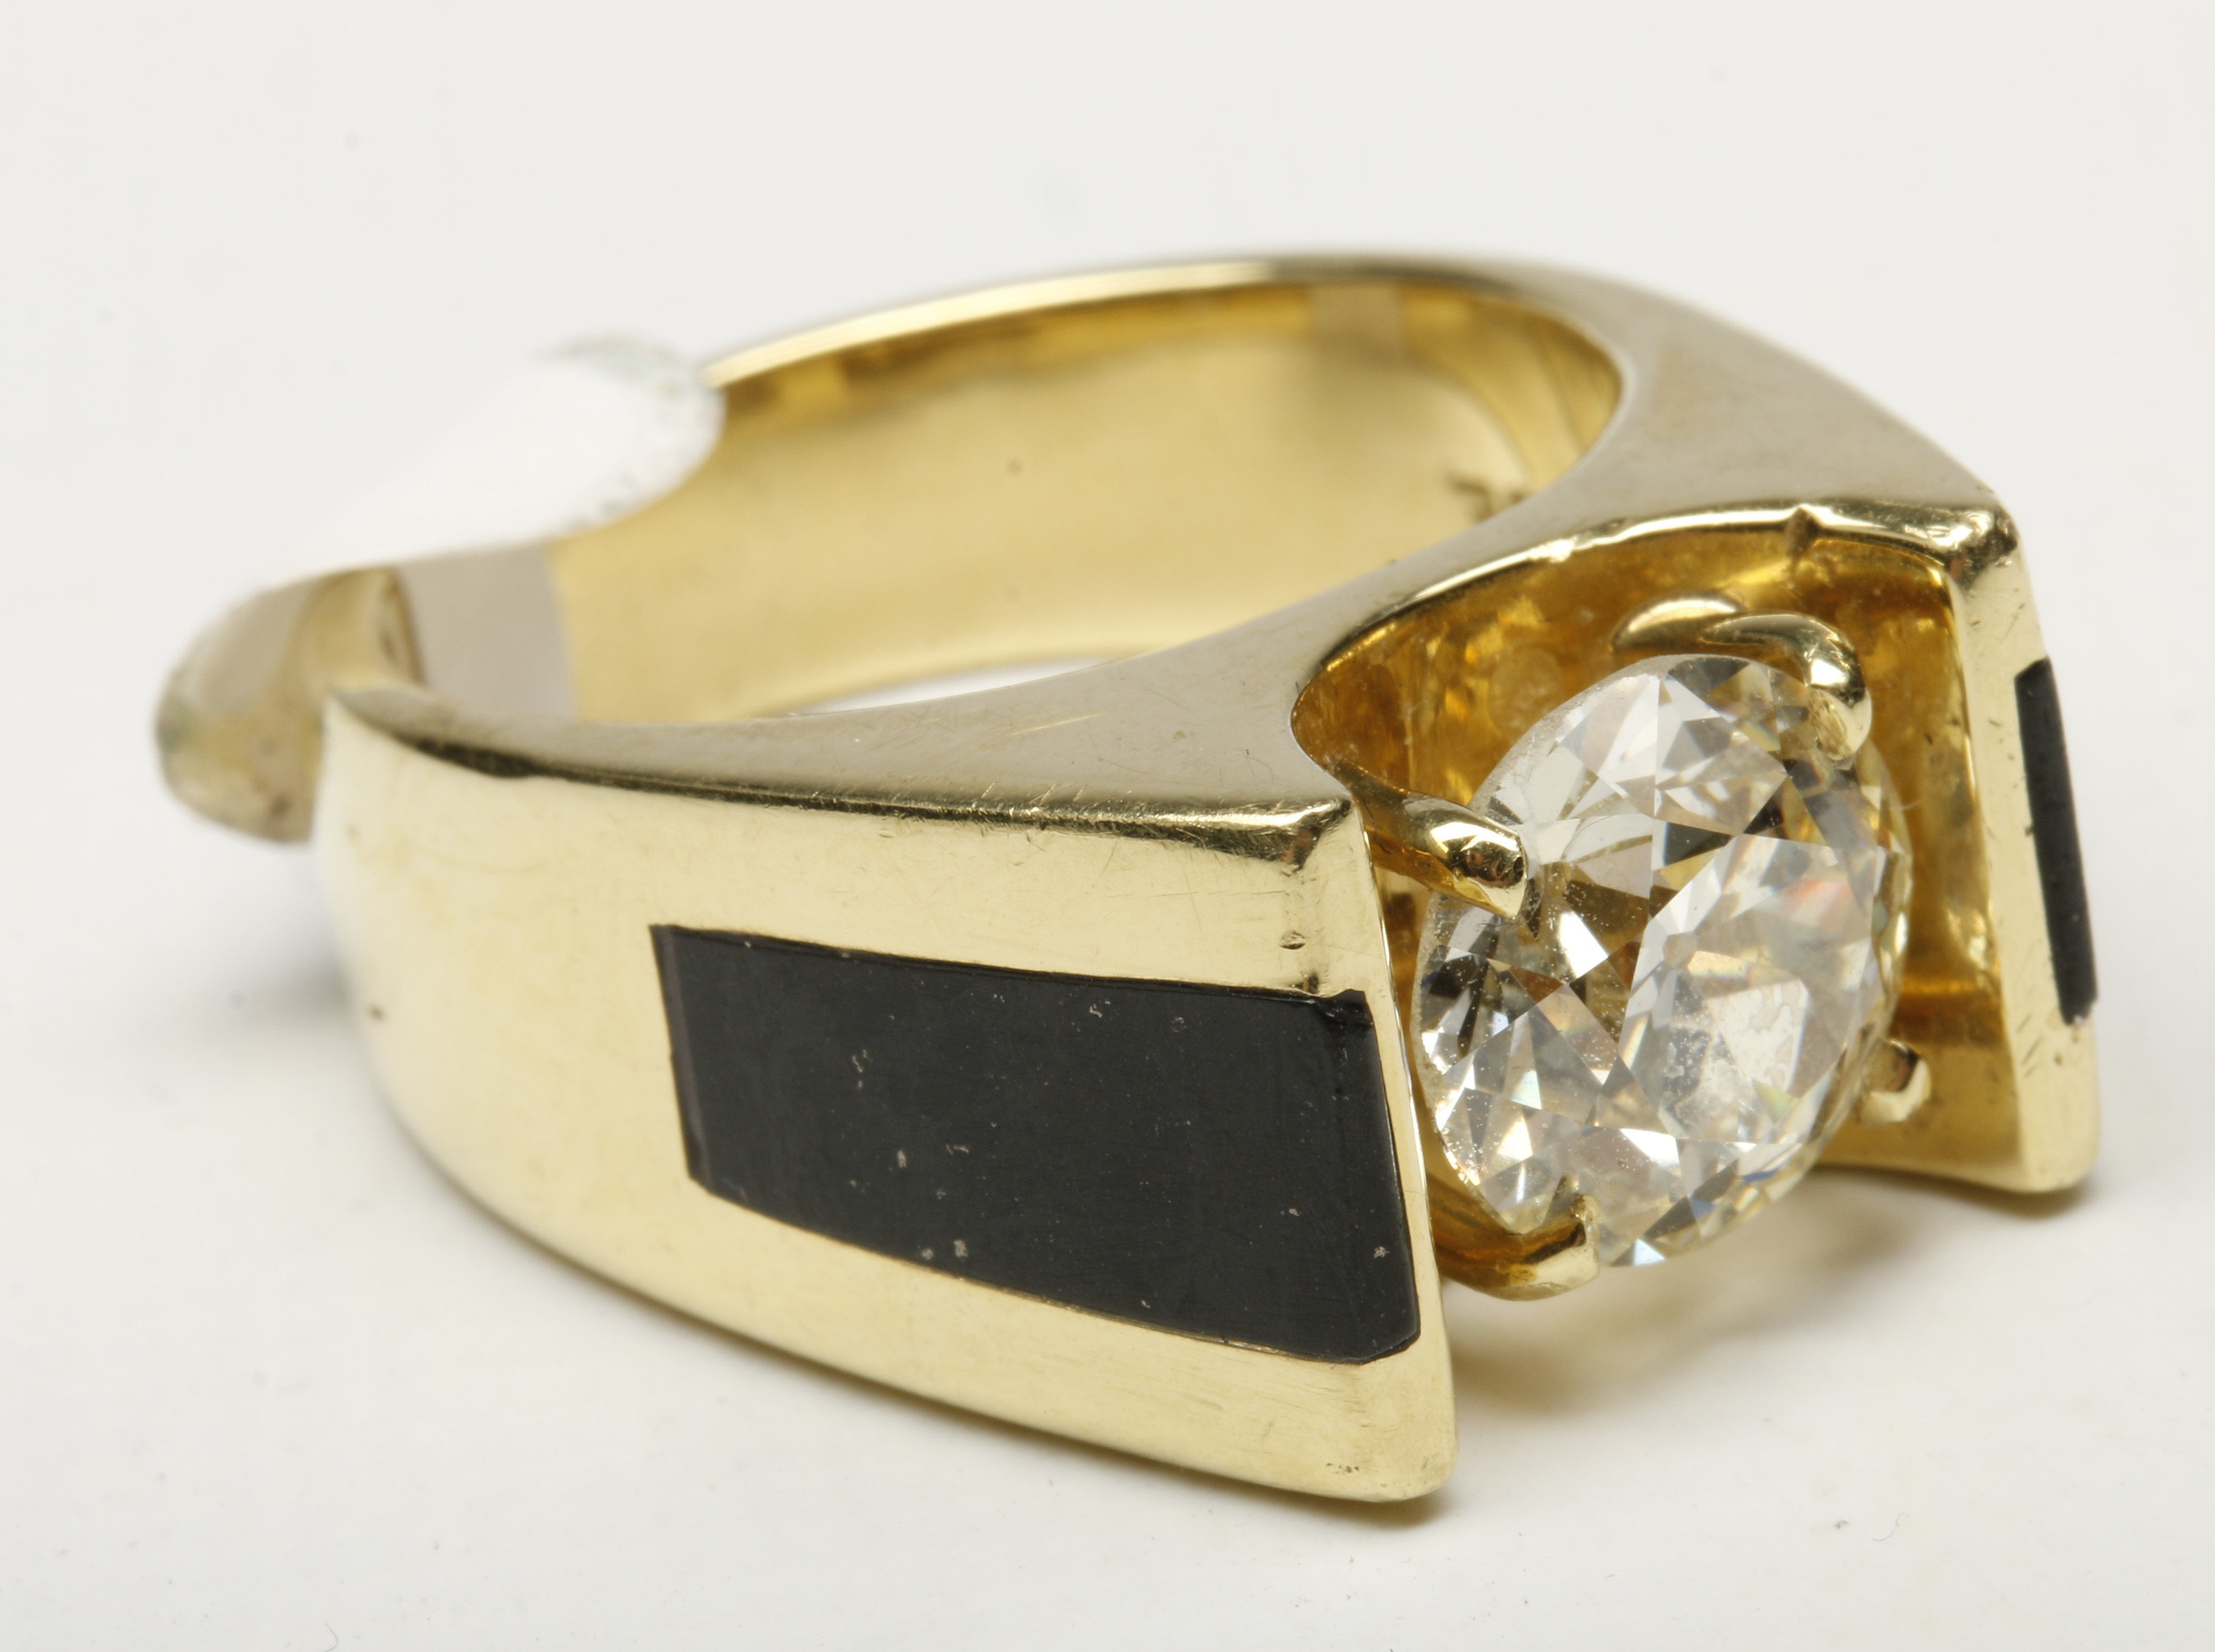 GENT'S 18K GOLD ONYX BAND WITH 3.26 CARAT GIA DIAM